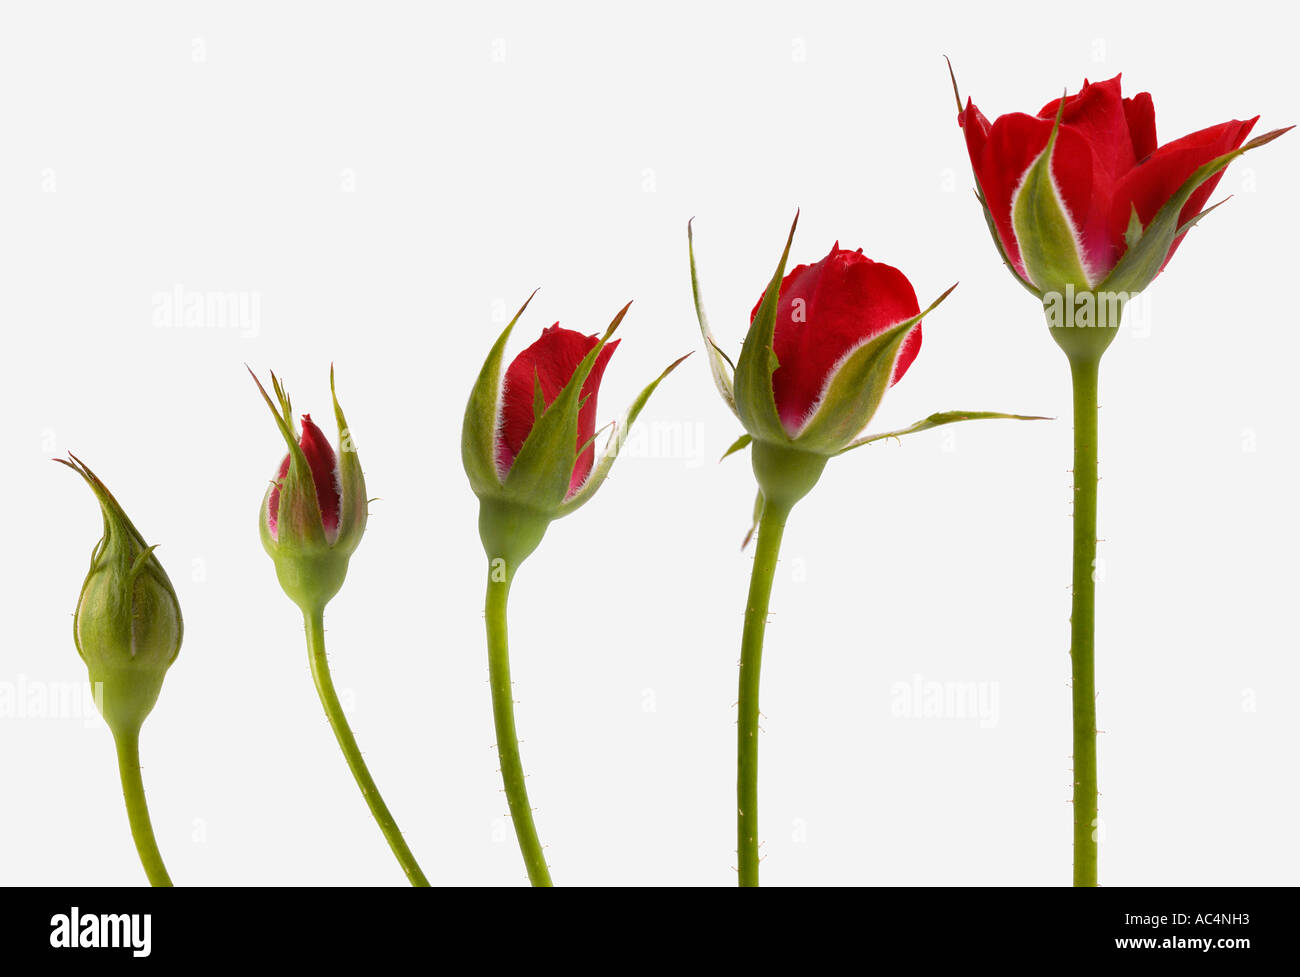 Red rose flower opening sequence Stock Photo Alamy